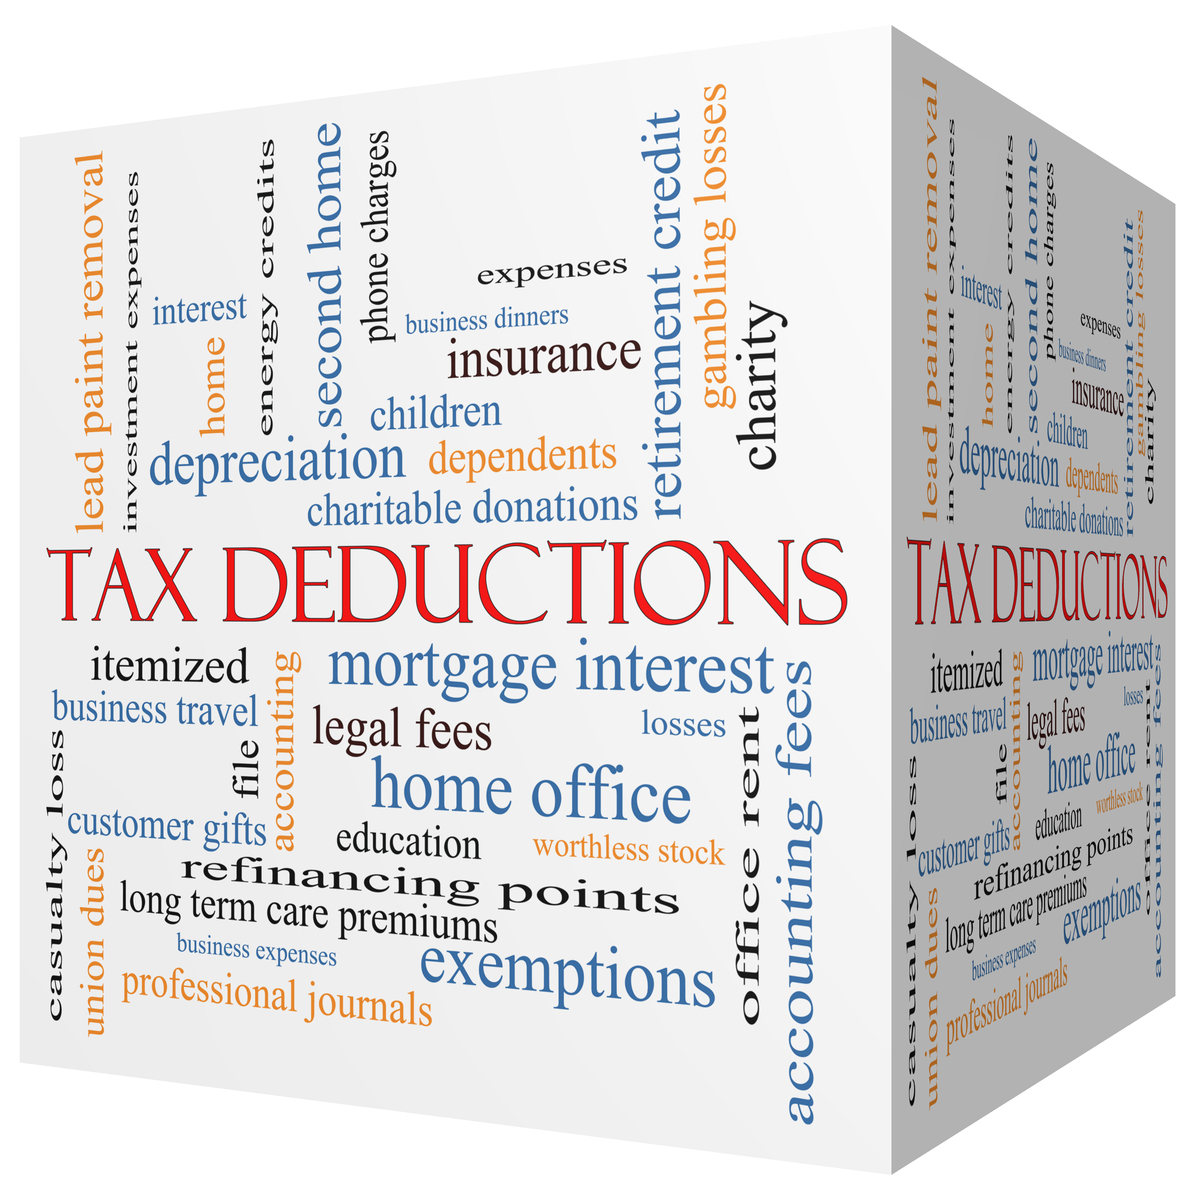 Tax deductions picture